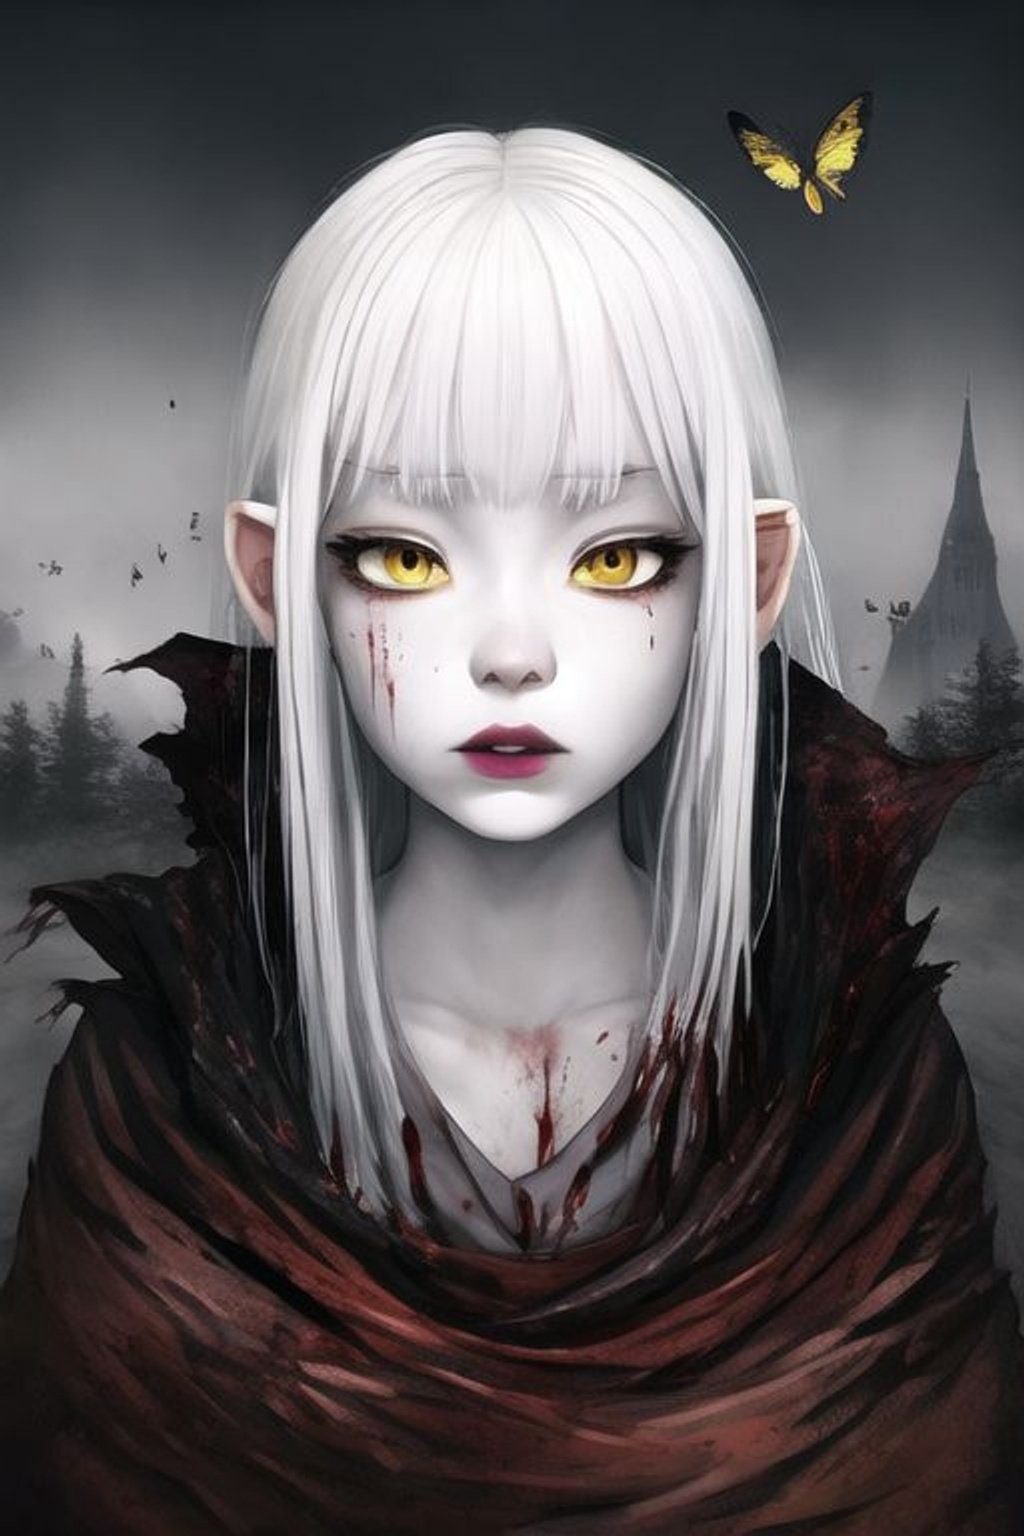 Prompt: SamDoesArt, kentaro_miura, 1girl, white_hair, yellow_eyes, detailed_face, mist, fog, dead_animals, bugs, insects, slight_rain, dark_atmosphere, castle, dark_tower, monsters, river, forest, blood, blood_flowing, dirty_area, torn_clothing, torn_robes, looking_at_viewer, slightly_parted_lips, corpses,